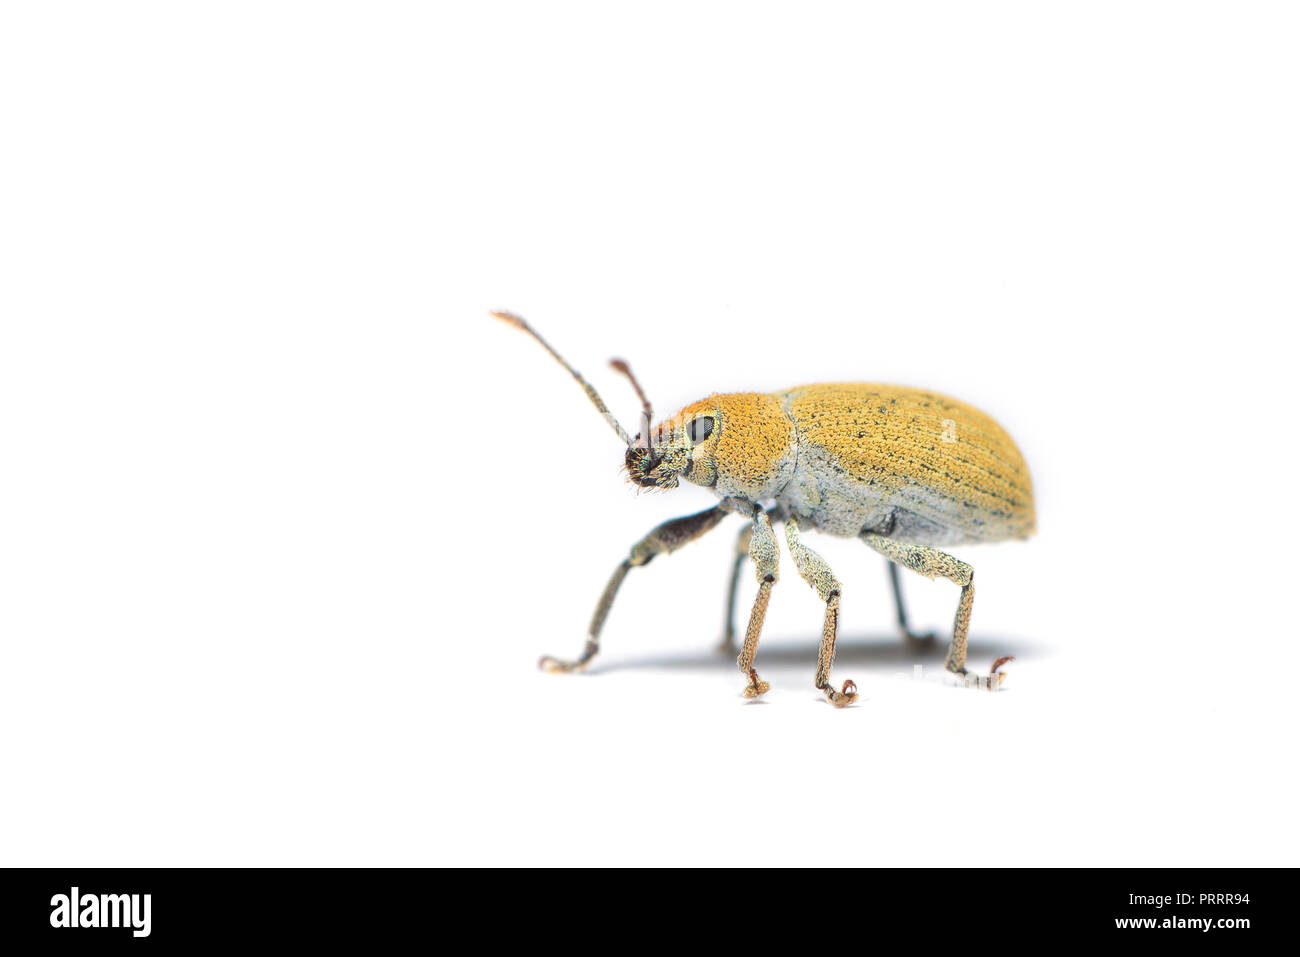 Short-nosed snout beetle or weevil isolated on white background Stock Photo